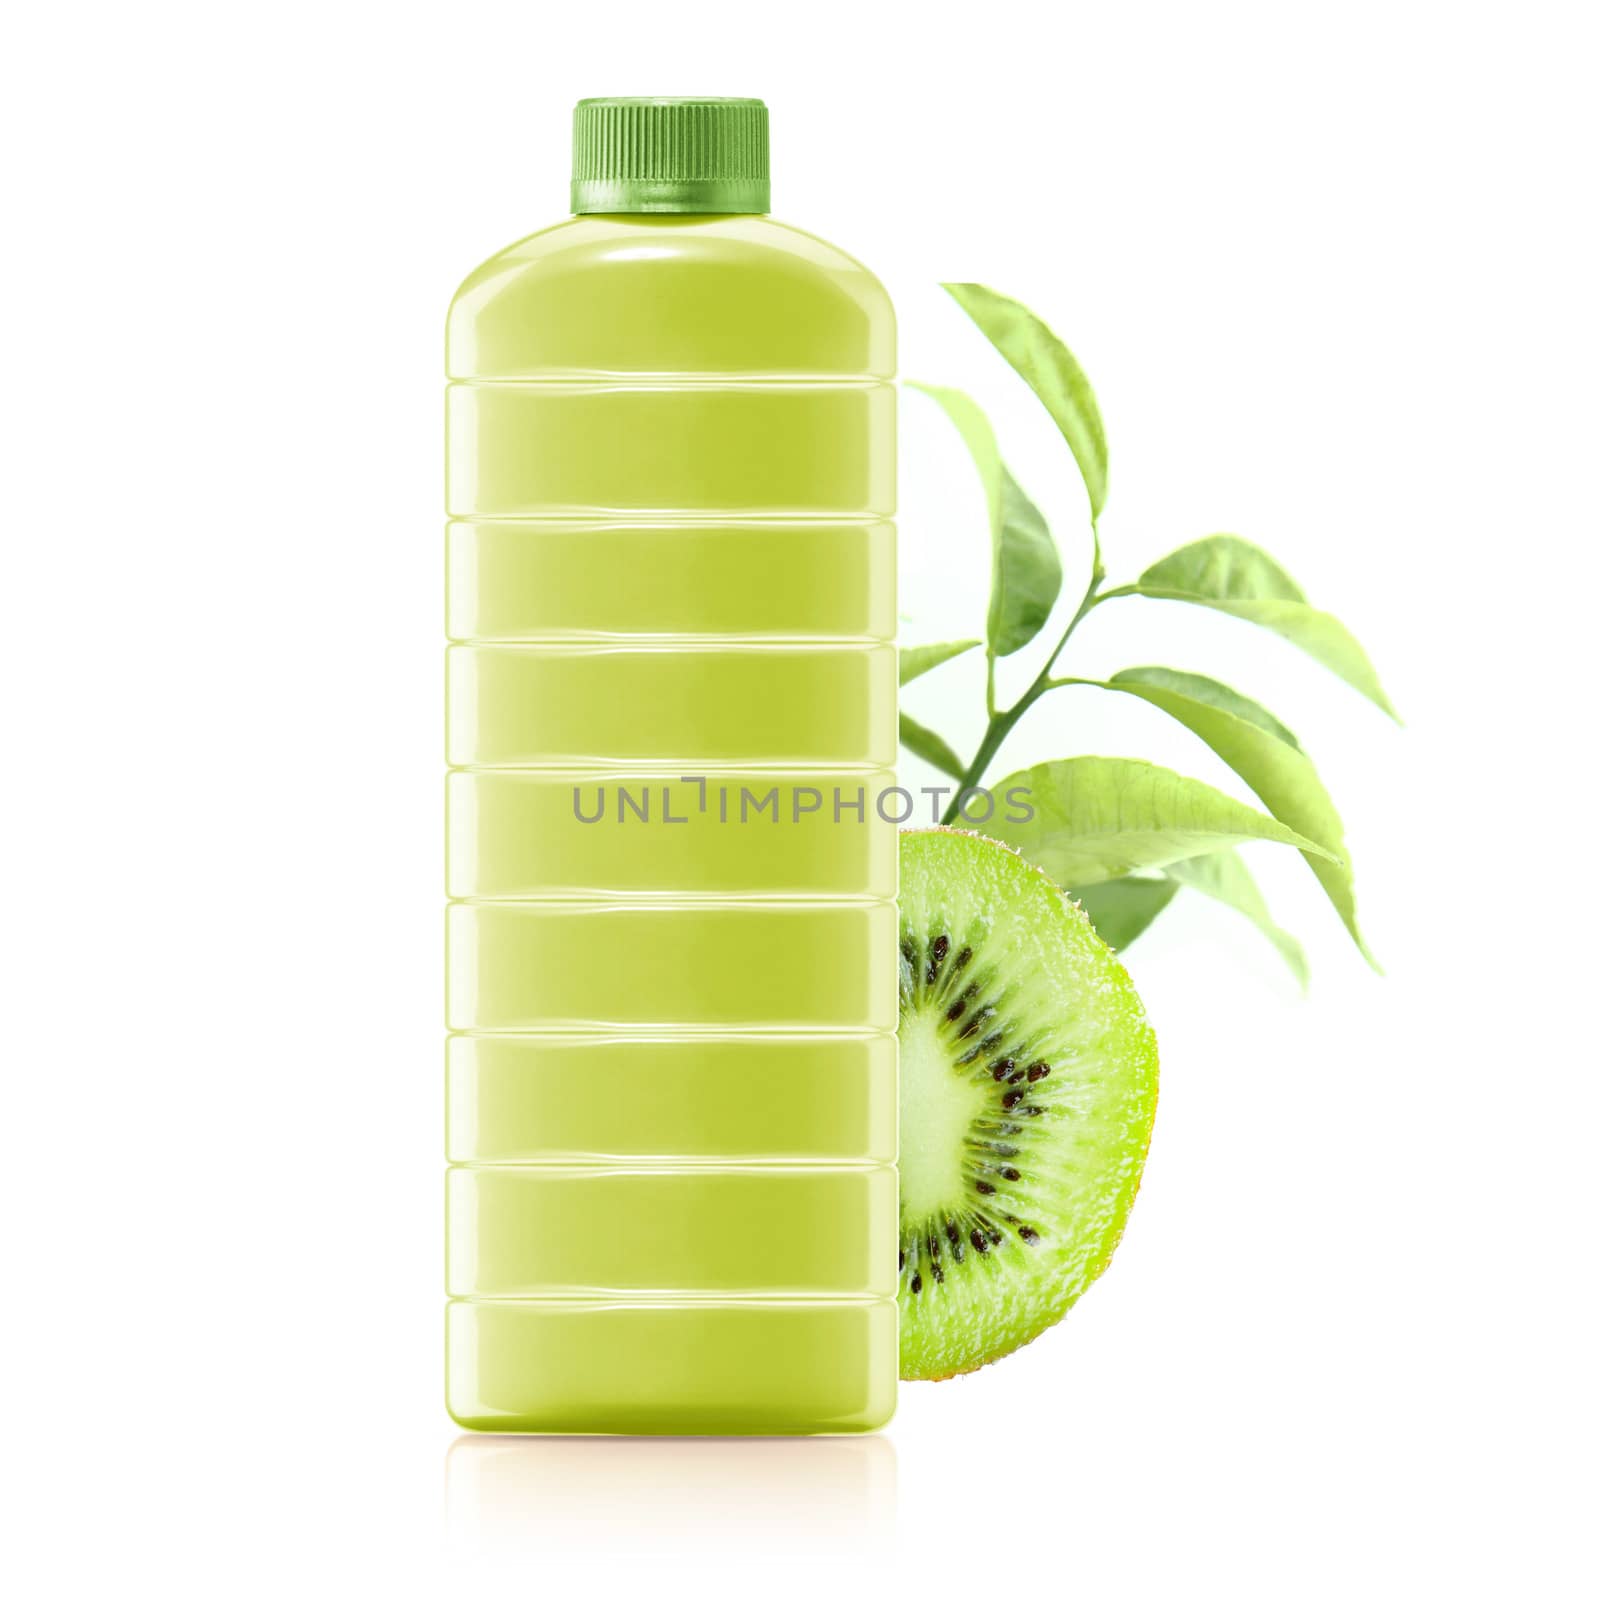 kiwi juice in a plastic container jug with fresh kiwi and leaves on a white background.